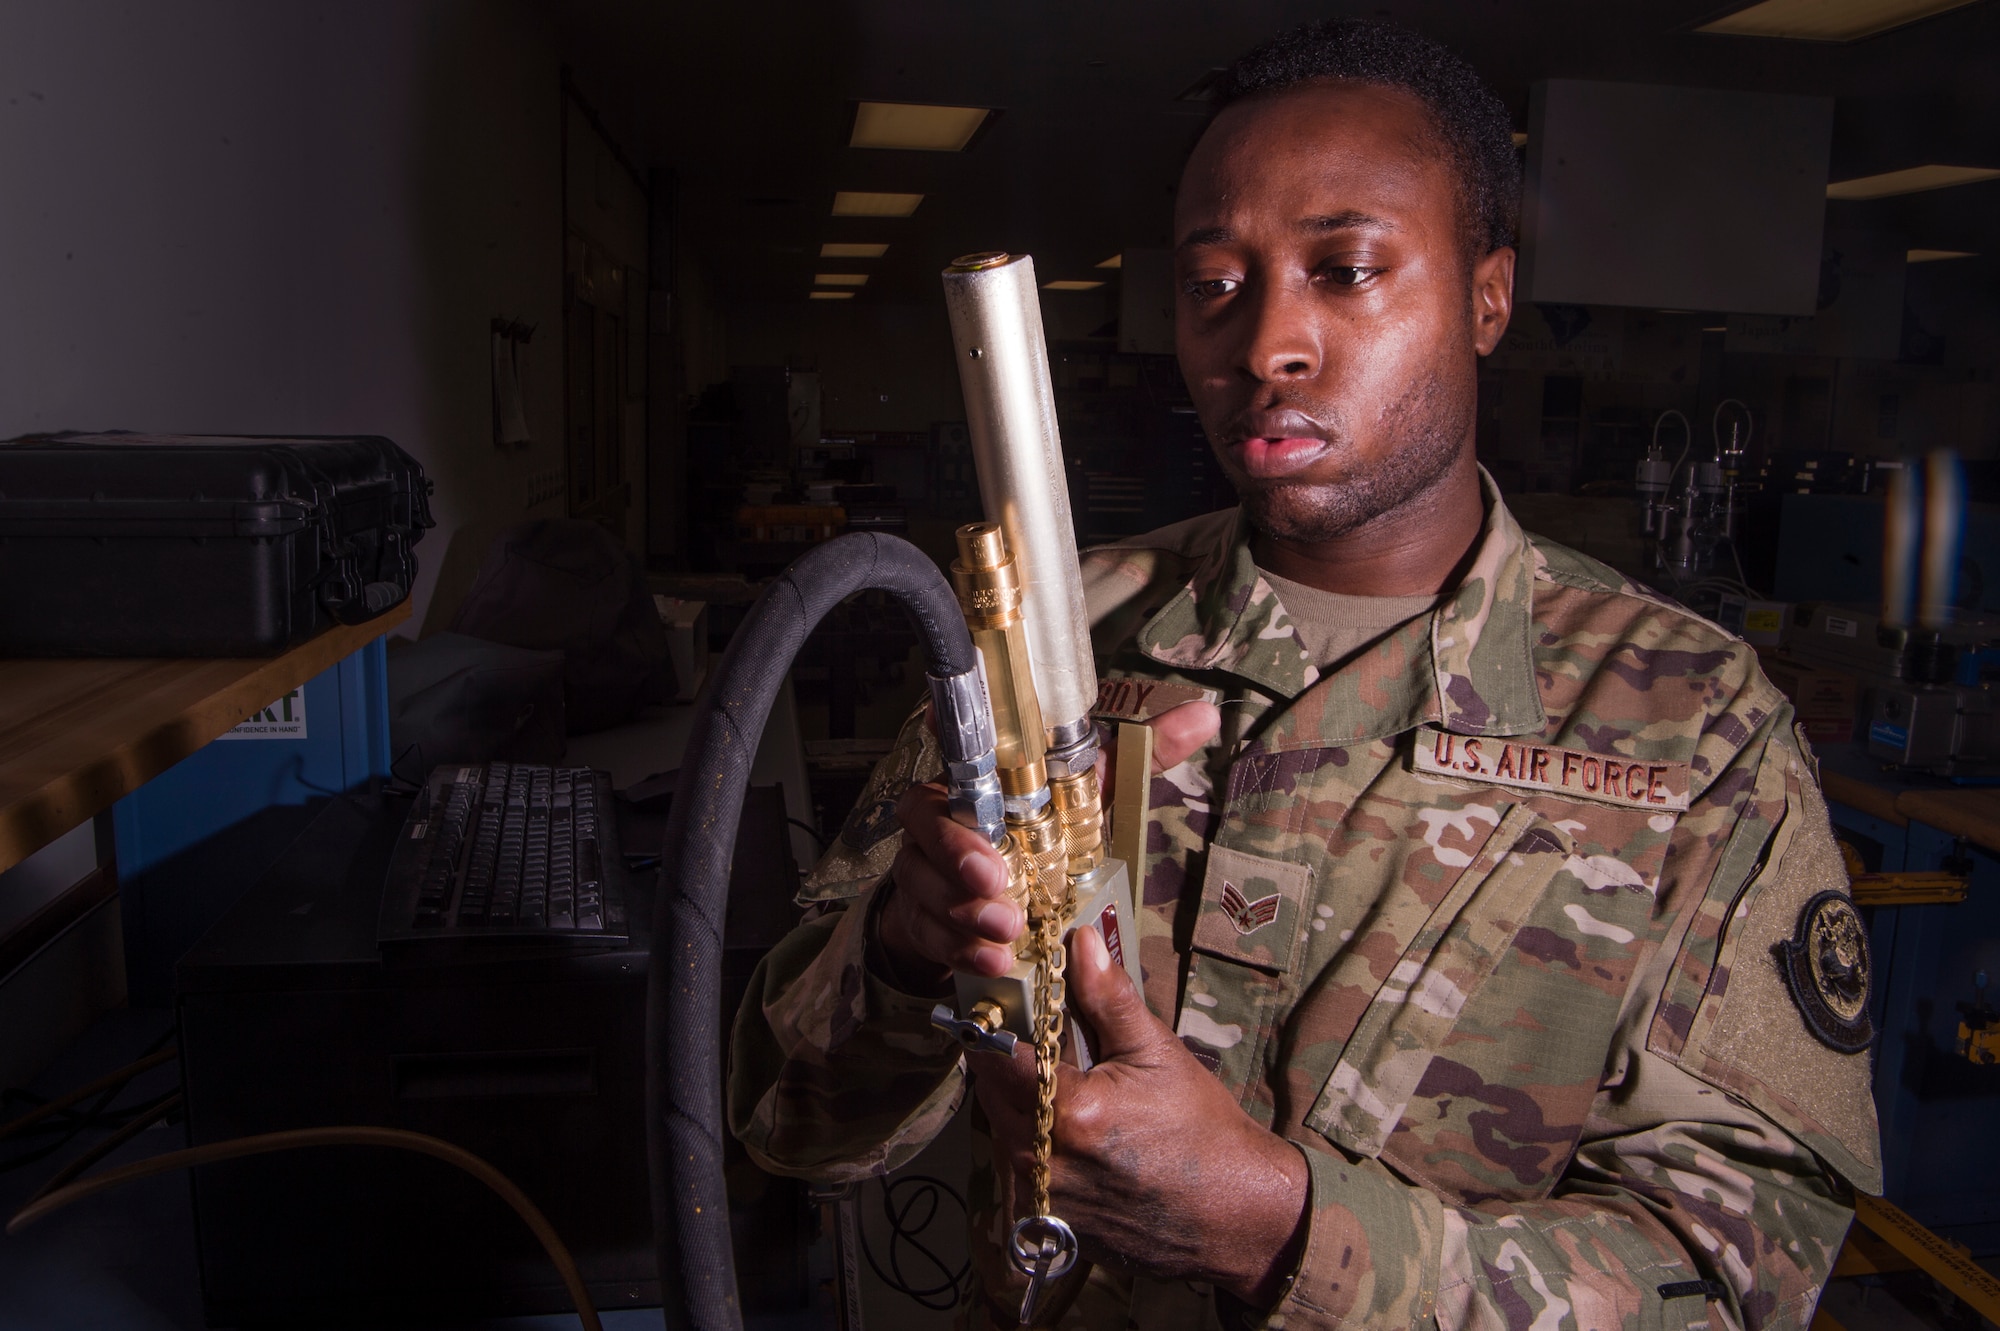 Senior Airman LaTerry Hardy, 379th Expeditionary Maintenance Squadron (EMXS) precision measurement equipment laboratory (PMEL) physical dimensions technician, uses a relief valve to set maximum tire pressures for tire inflator kits Jan. 25, 2019, at Al Udeid Air Base, Qatar. Members of Al Udeid’s PMEL team support other deployed locations across U.S. Air Forces Central Command’s area of responsibility and can forward deploy when equipment isn’t able to be shipped here for repair. The team supports approximately 14,000 pieces of test, measurement and diagnostic equipment used by various other career fields. (U.S. Air Force Tech. Sgt. Christopher Hubenthal)